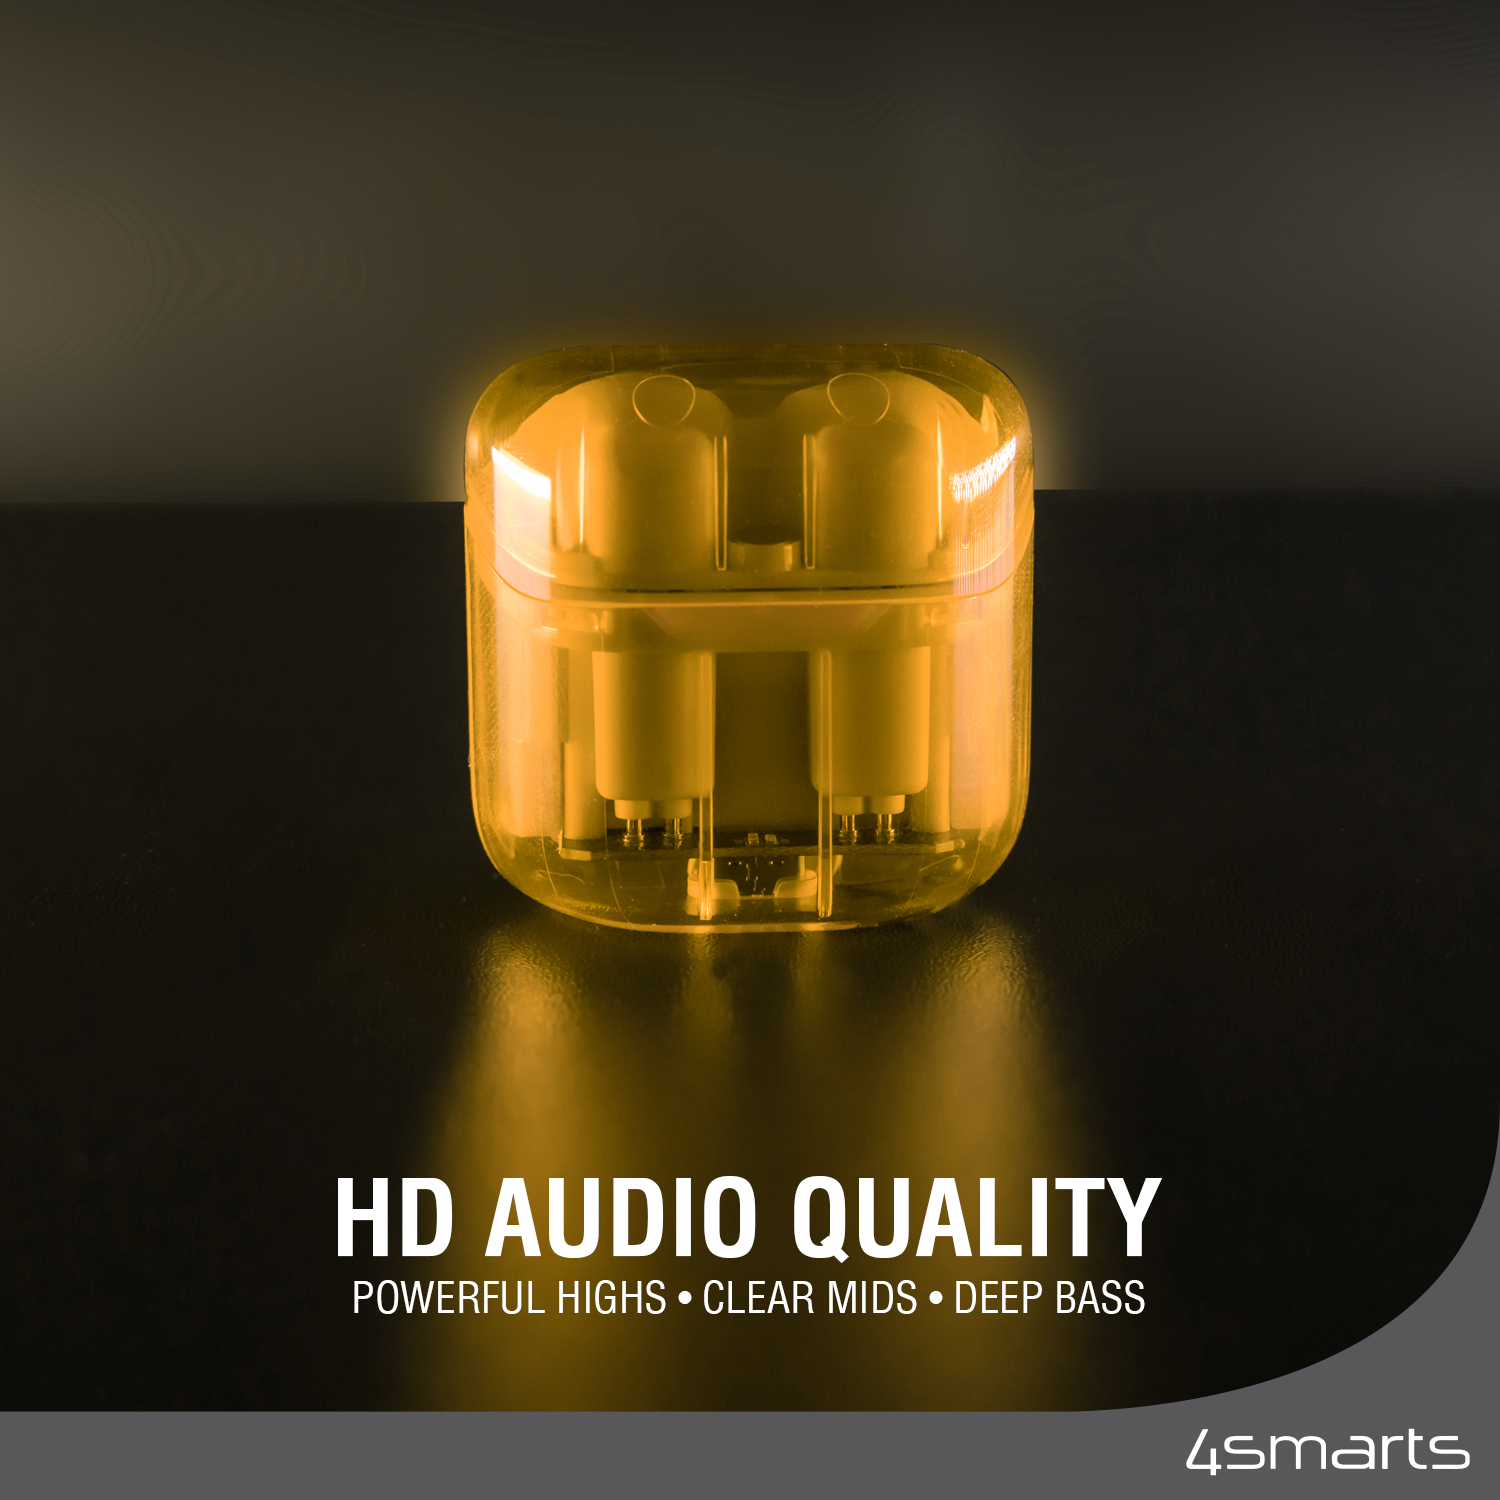 The Lucid wireless headphones will amaze you with their HD audio quality.